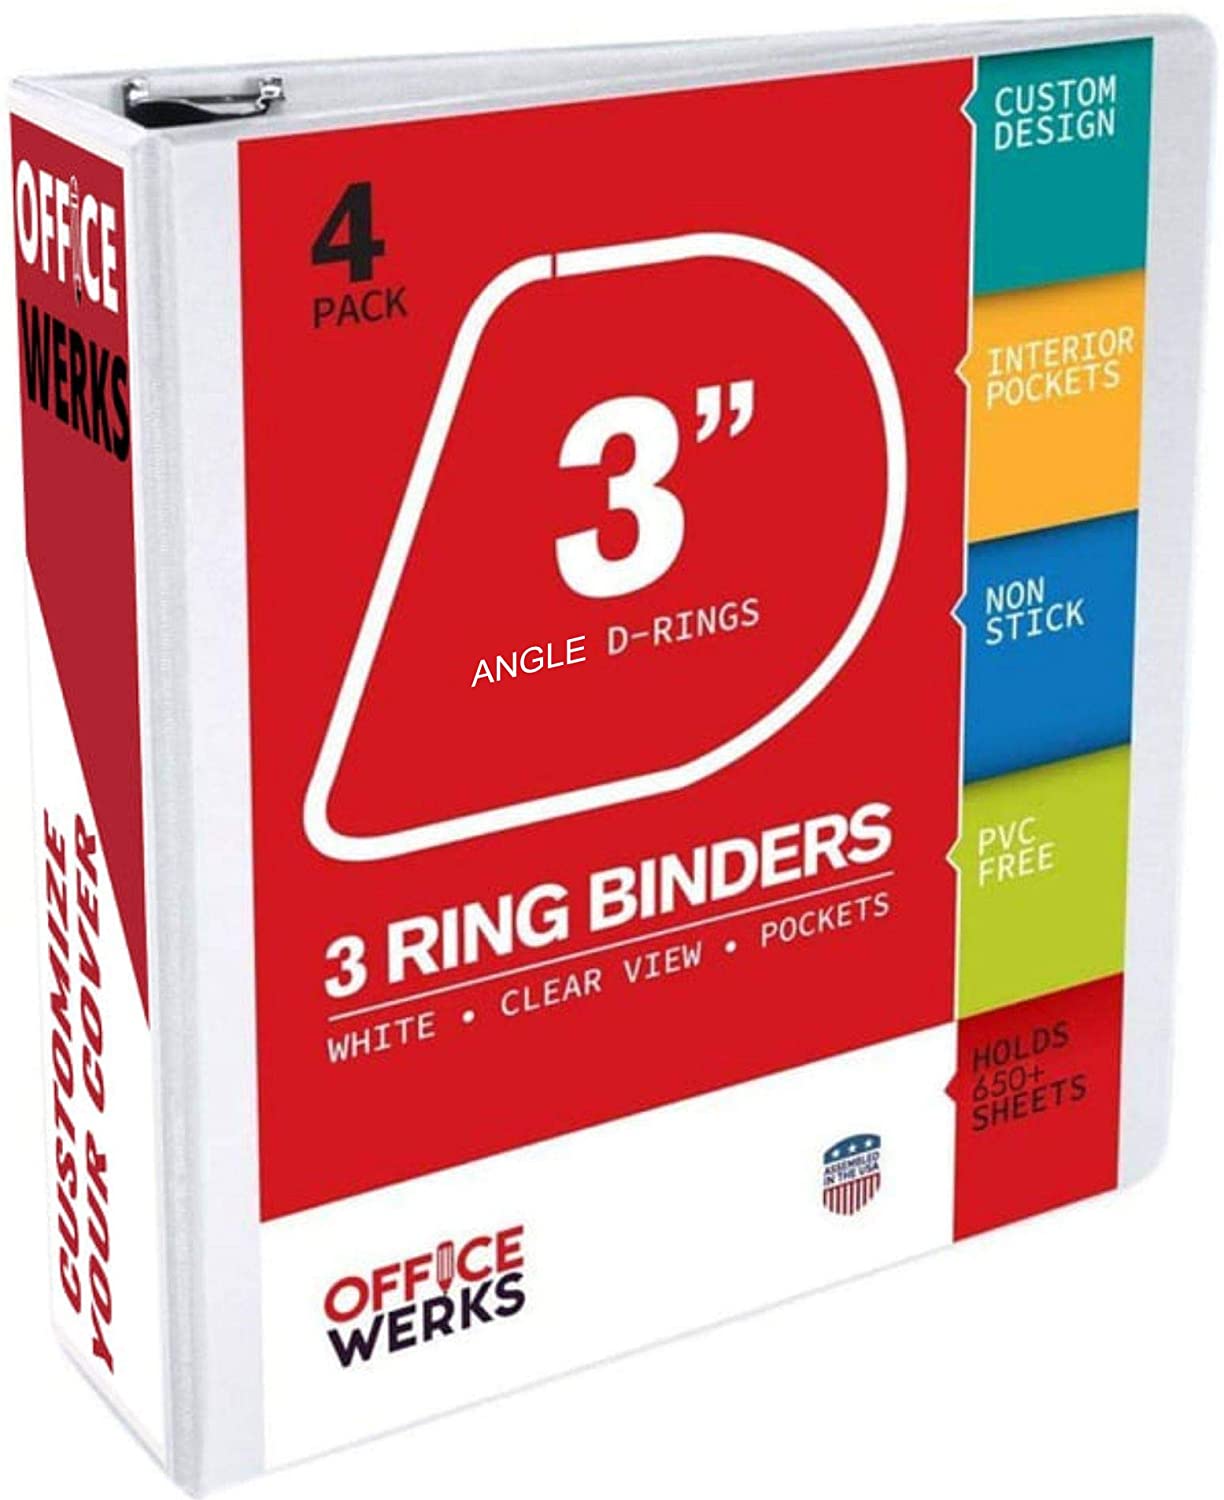 3 Ring Binder, 3 Inch Angle D-Rings, White, Clear View, Pockets, 4 Pack